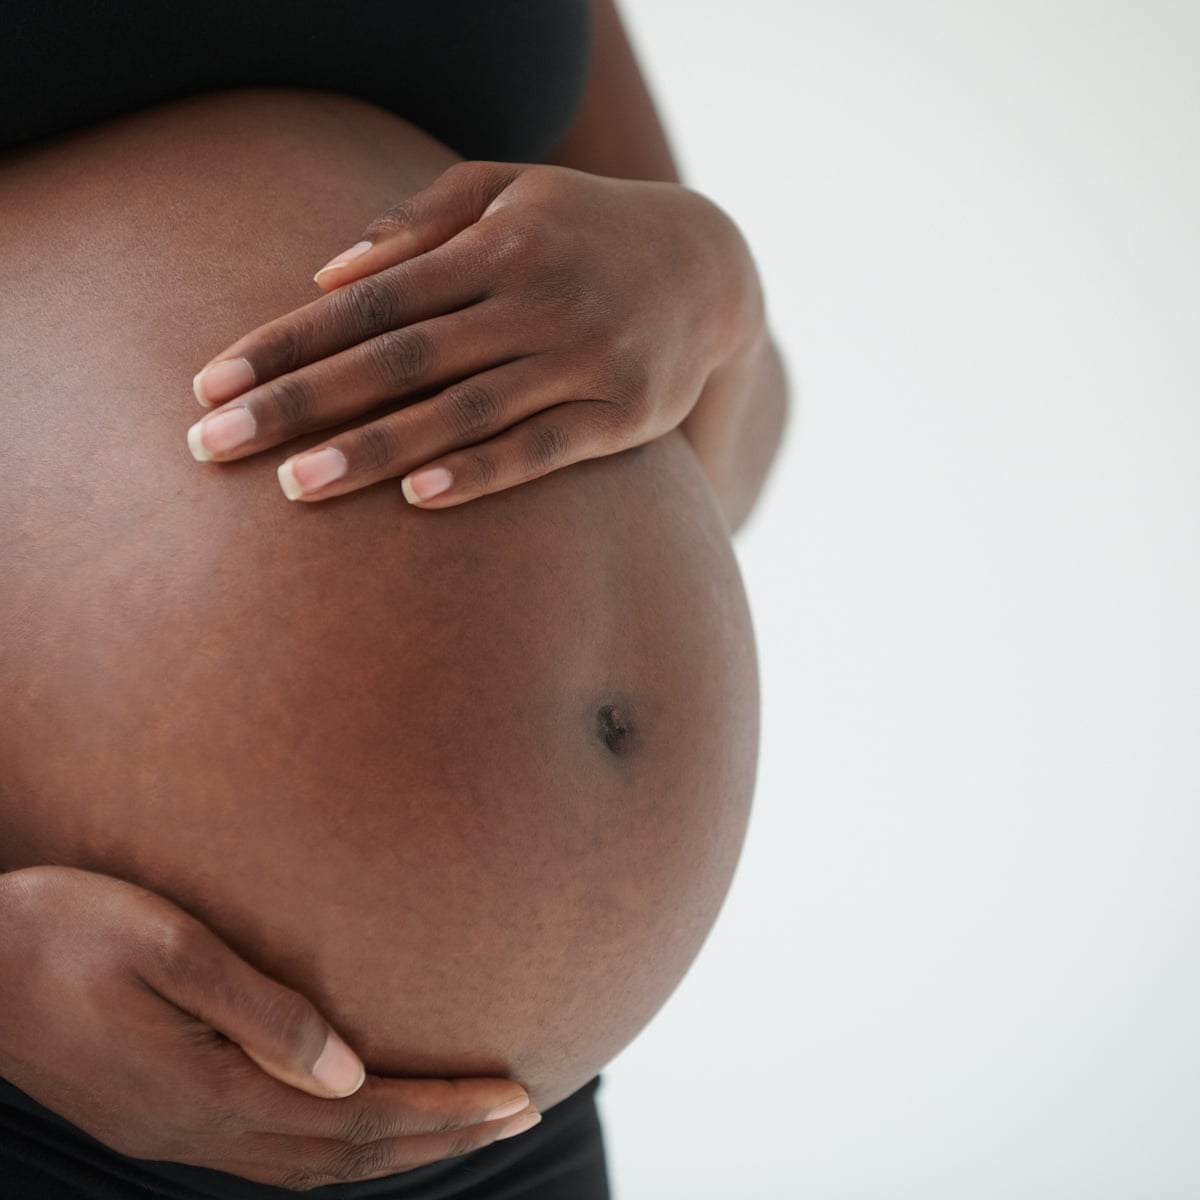 9 and a Half Things You Should Never Say to a Pregnant Woman - Time